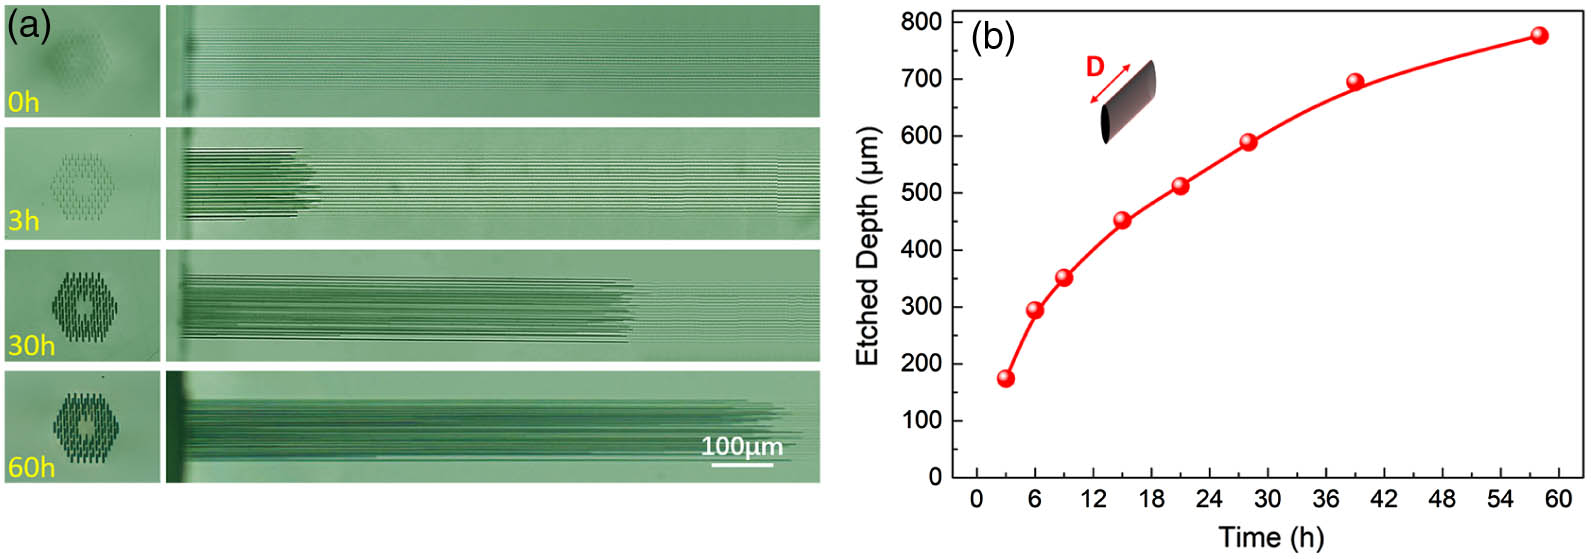 (a) Microscopic images of the end-faces and top-view patterns at the etching time of 0, 3, 30, and 60 h and (b) the etched dimensions of microchannel depth as a function of the etching time.